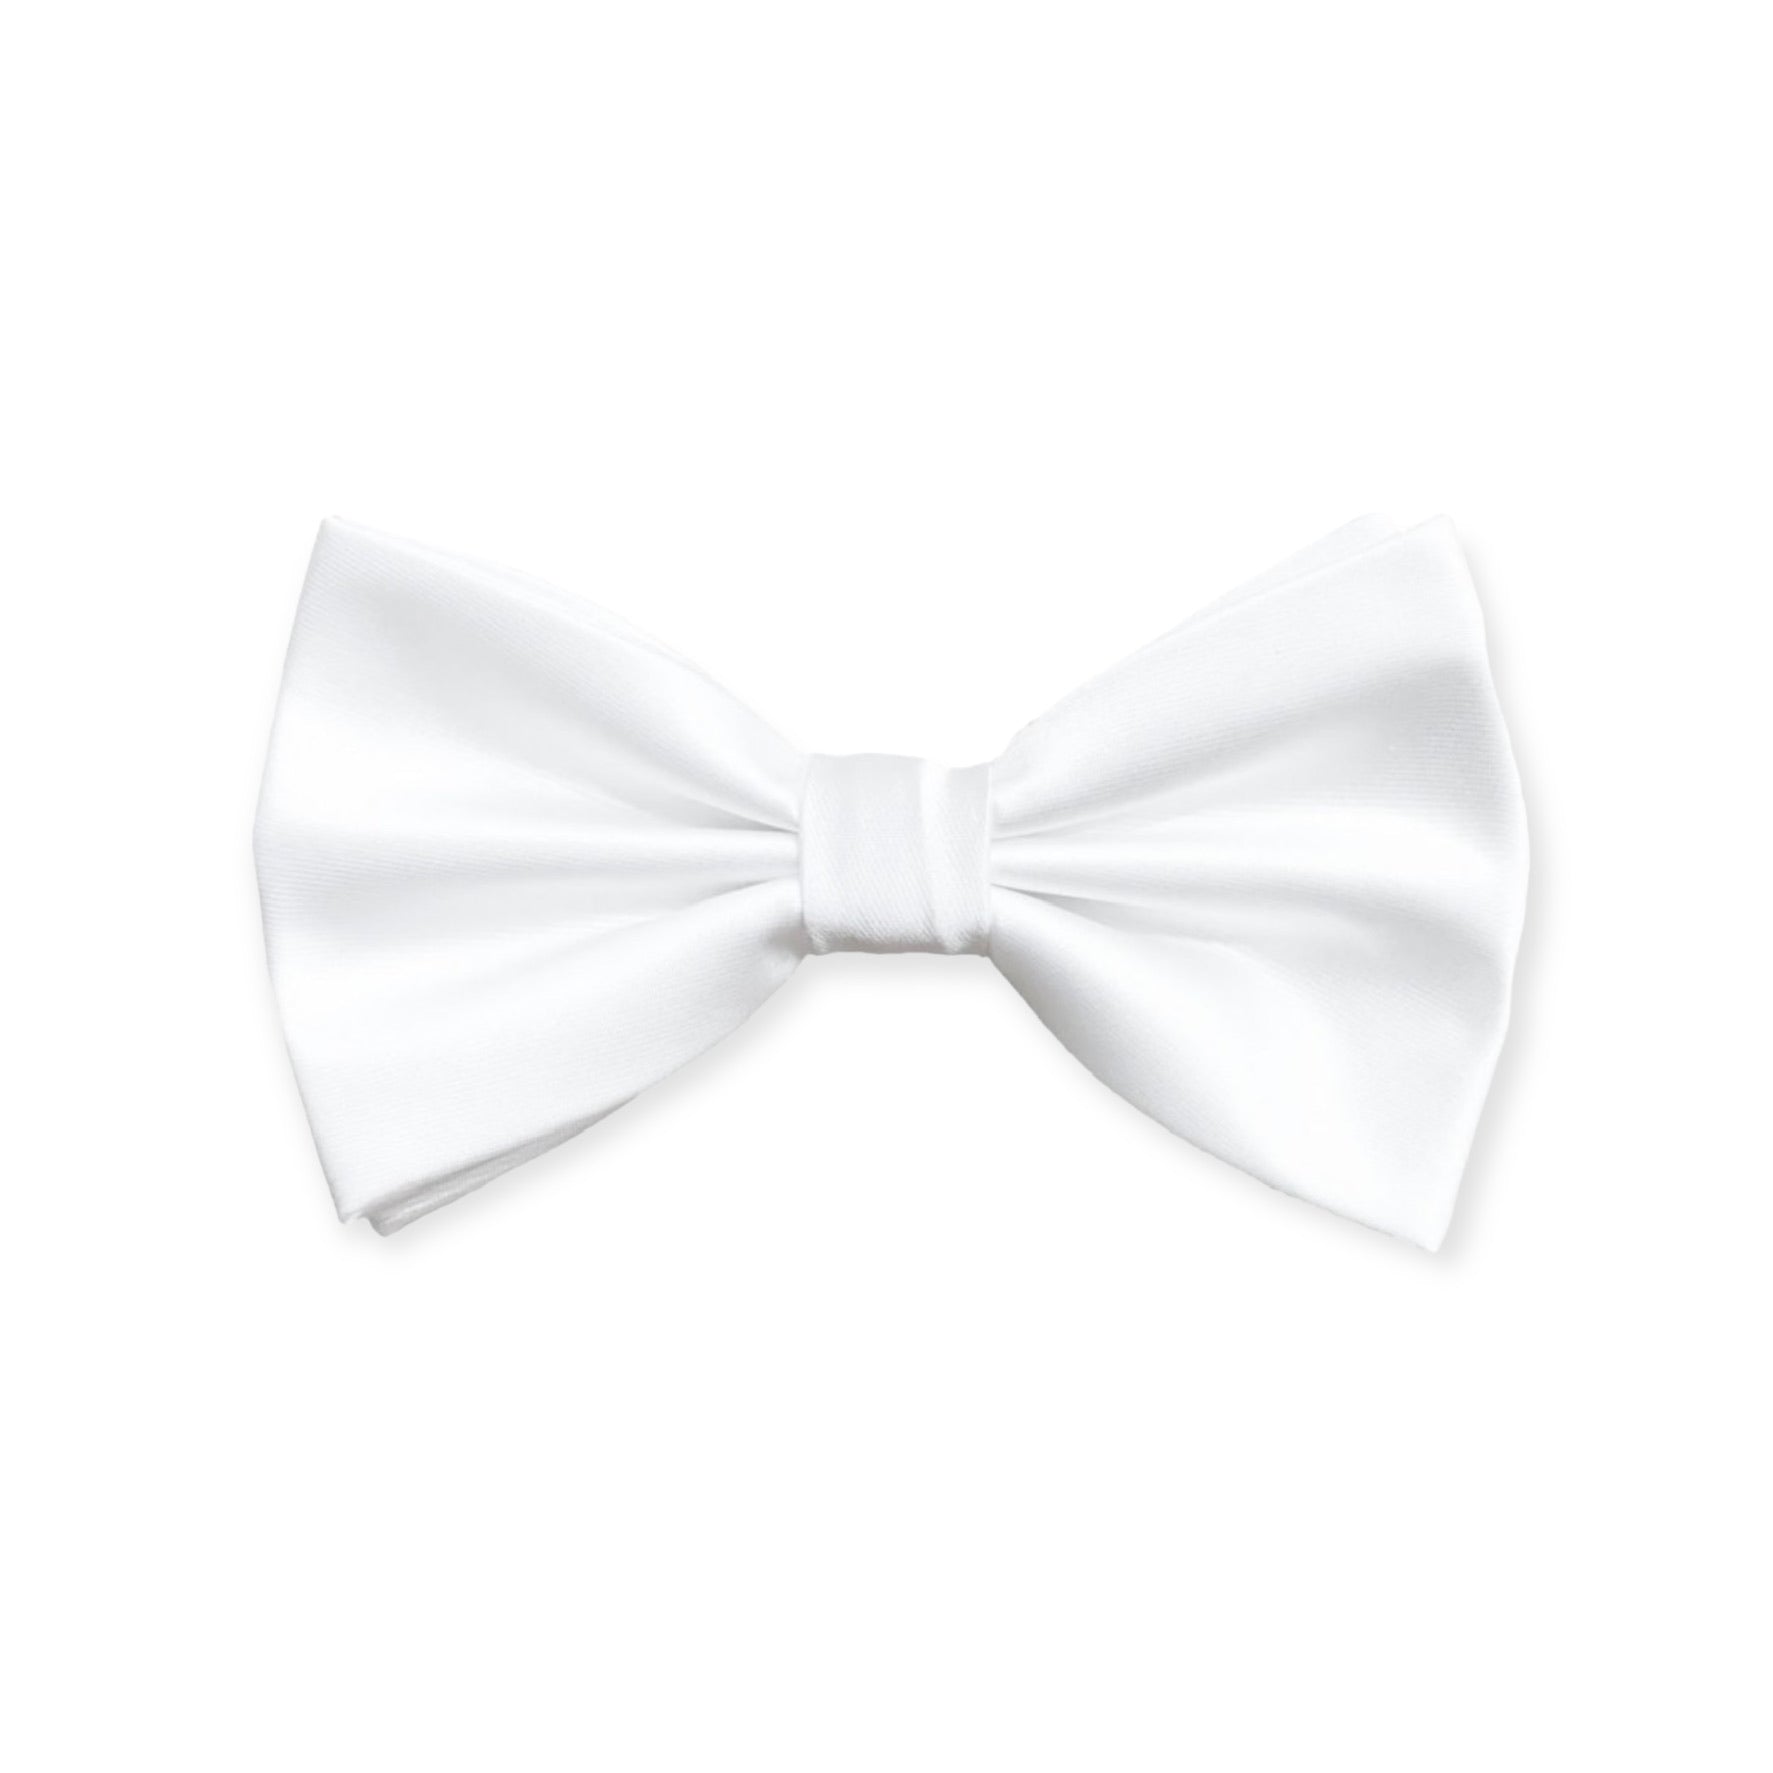 Solid White Bow Tie and Hanky